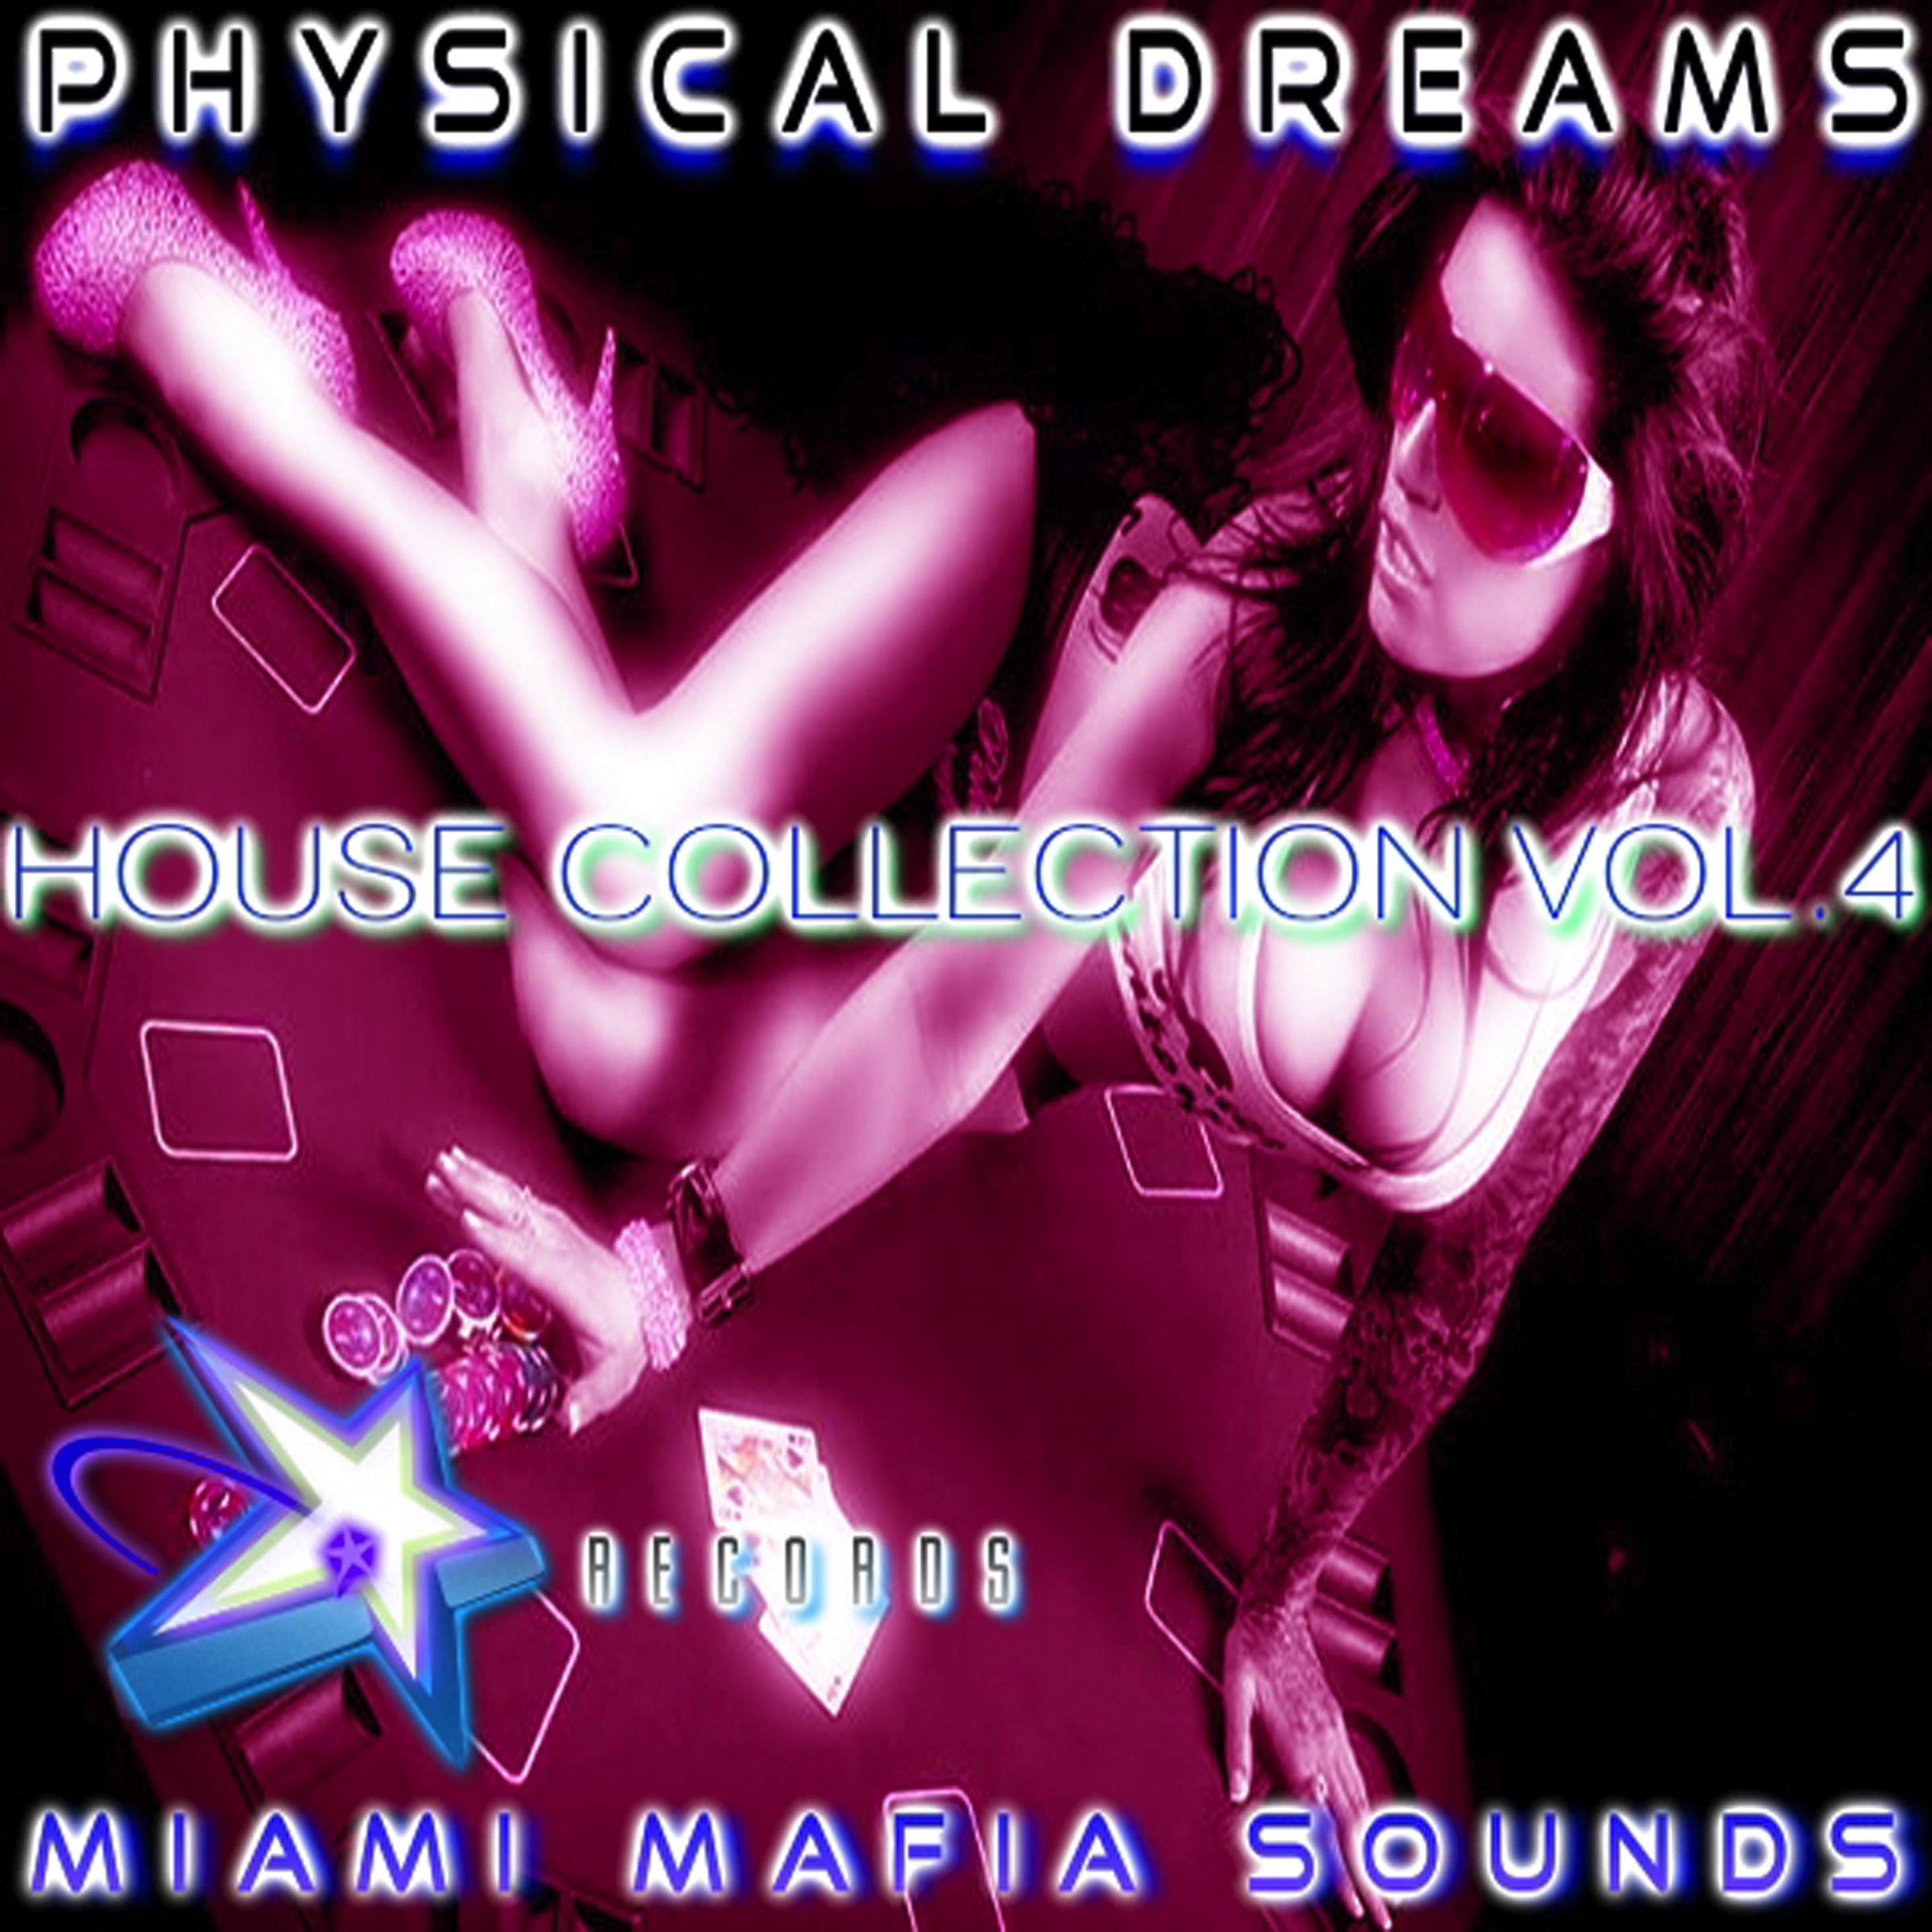 Physical Dreams House Collection, Vol. 4